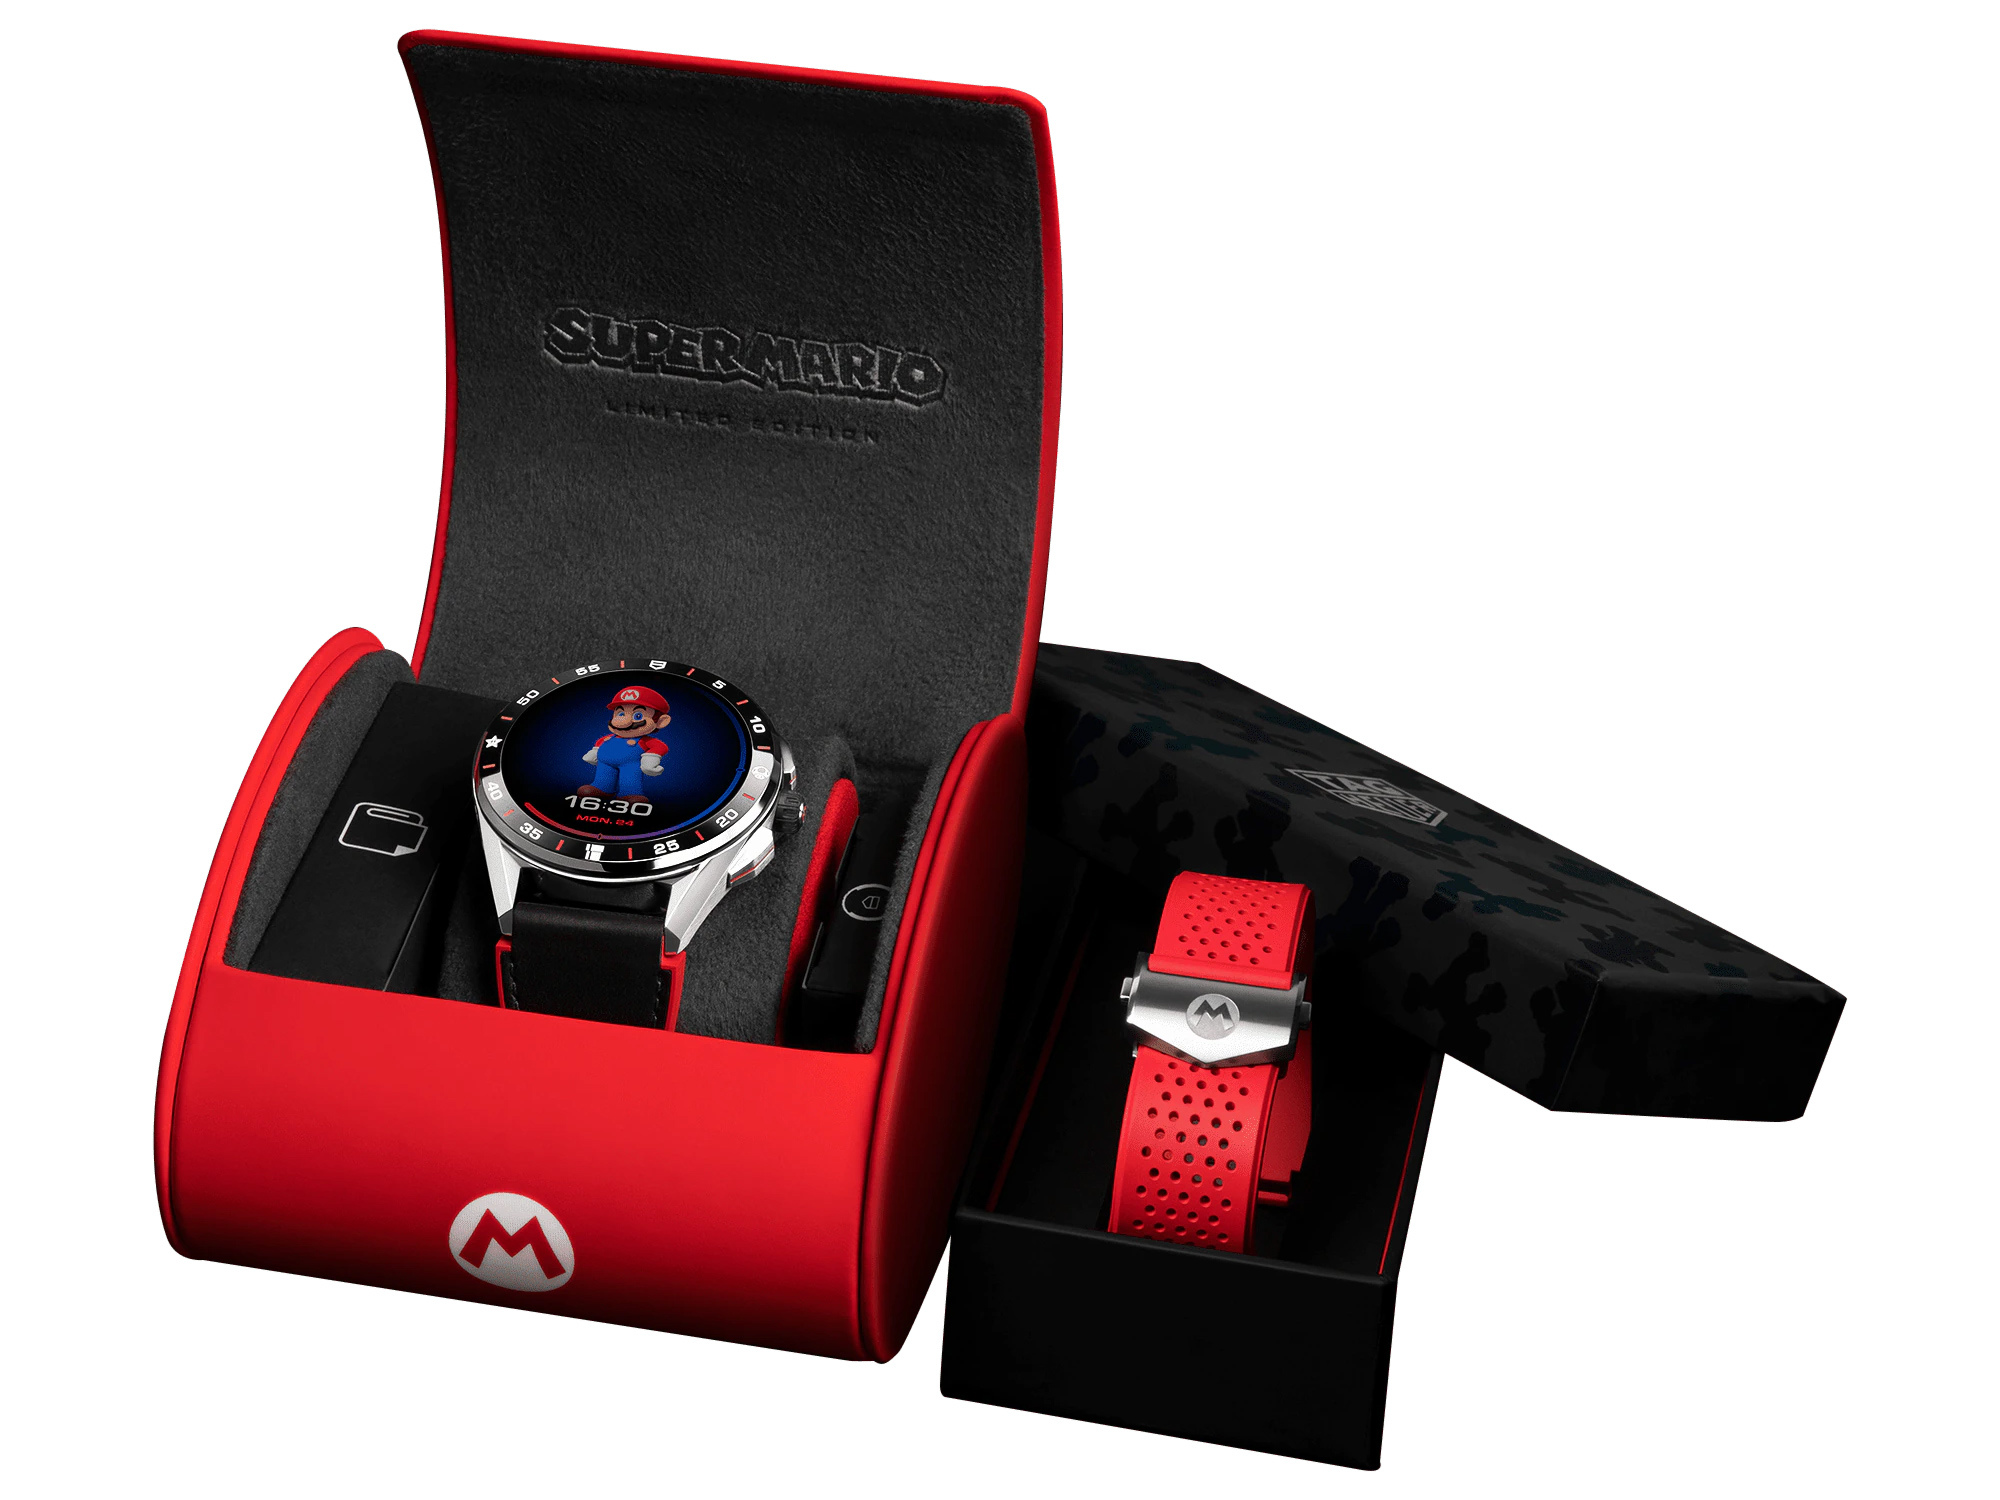 The $2,000 Super Mario smartwatch you've always wanted is here